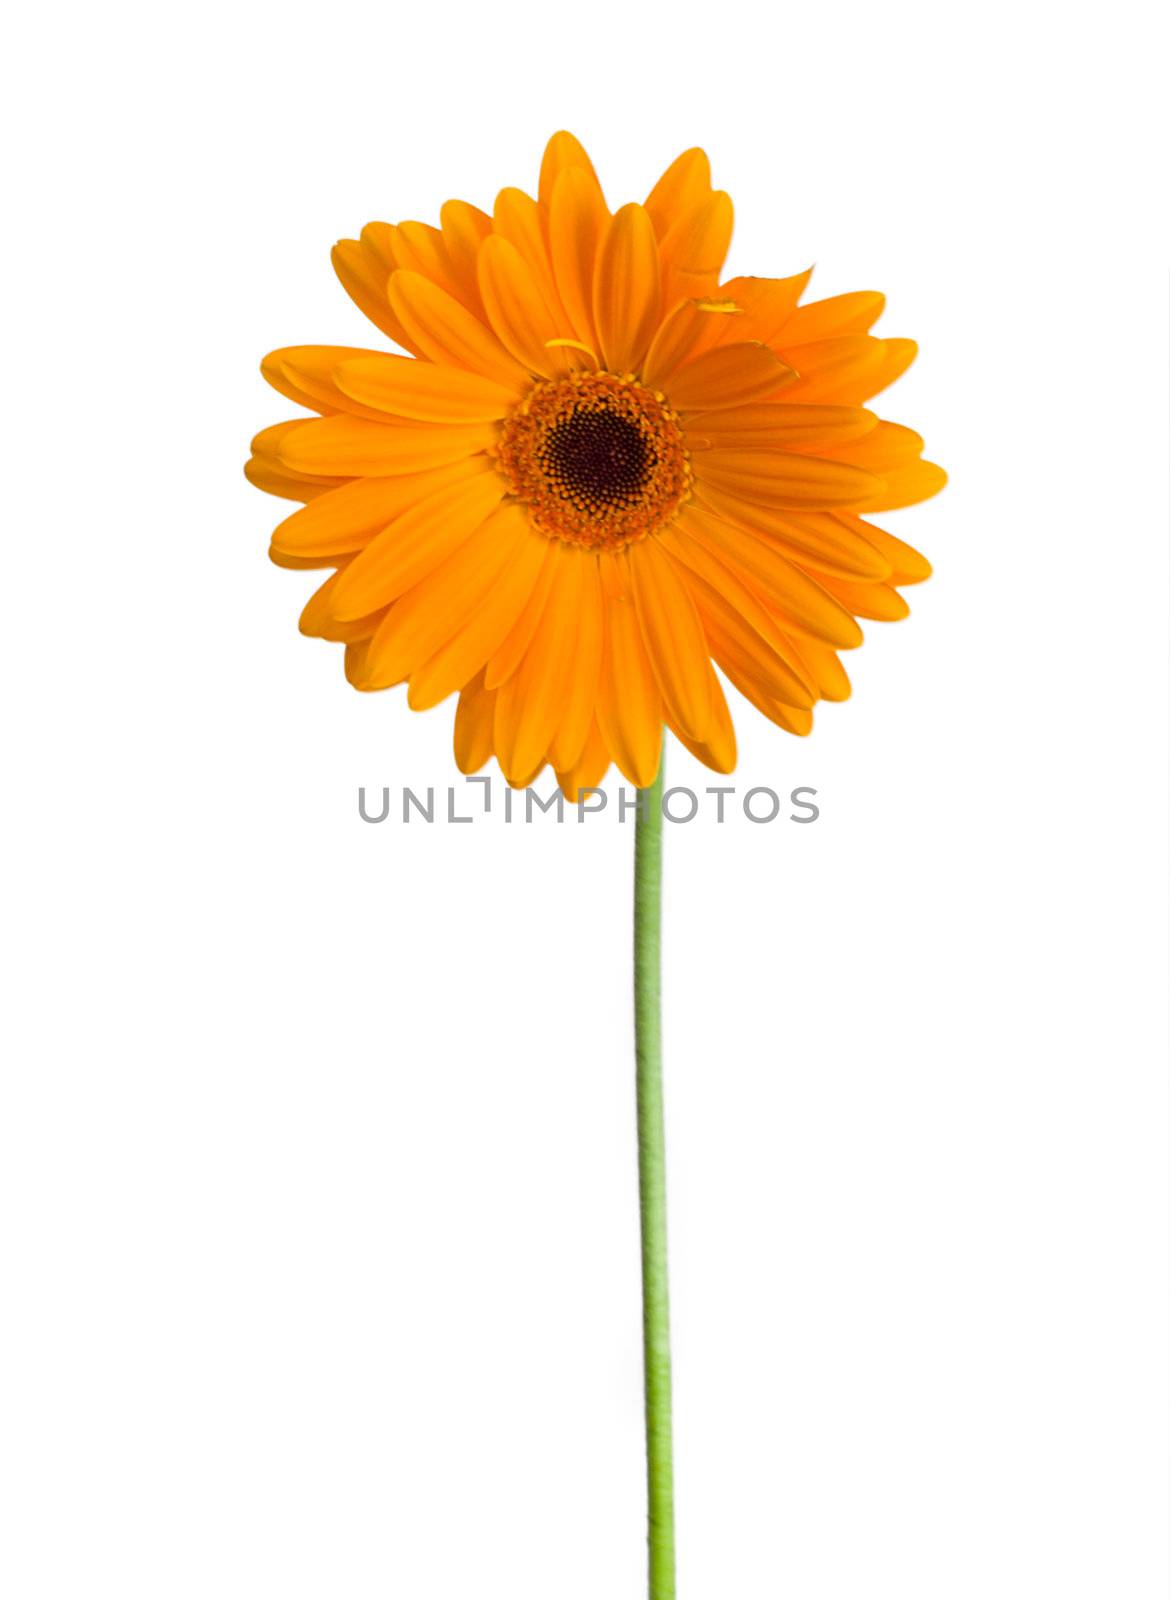 front view orange gerbera, isolated on white